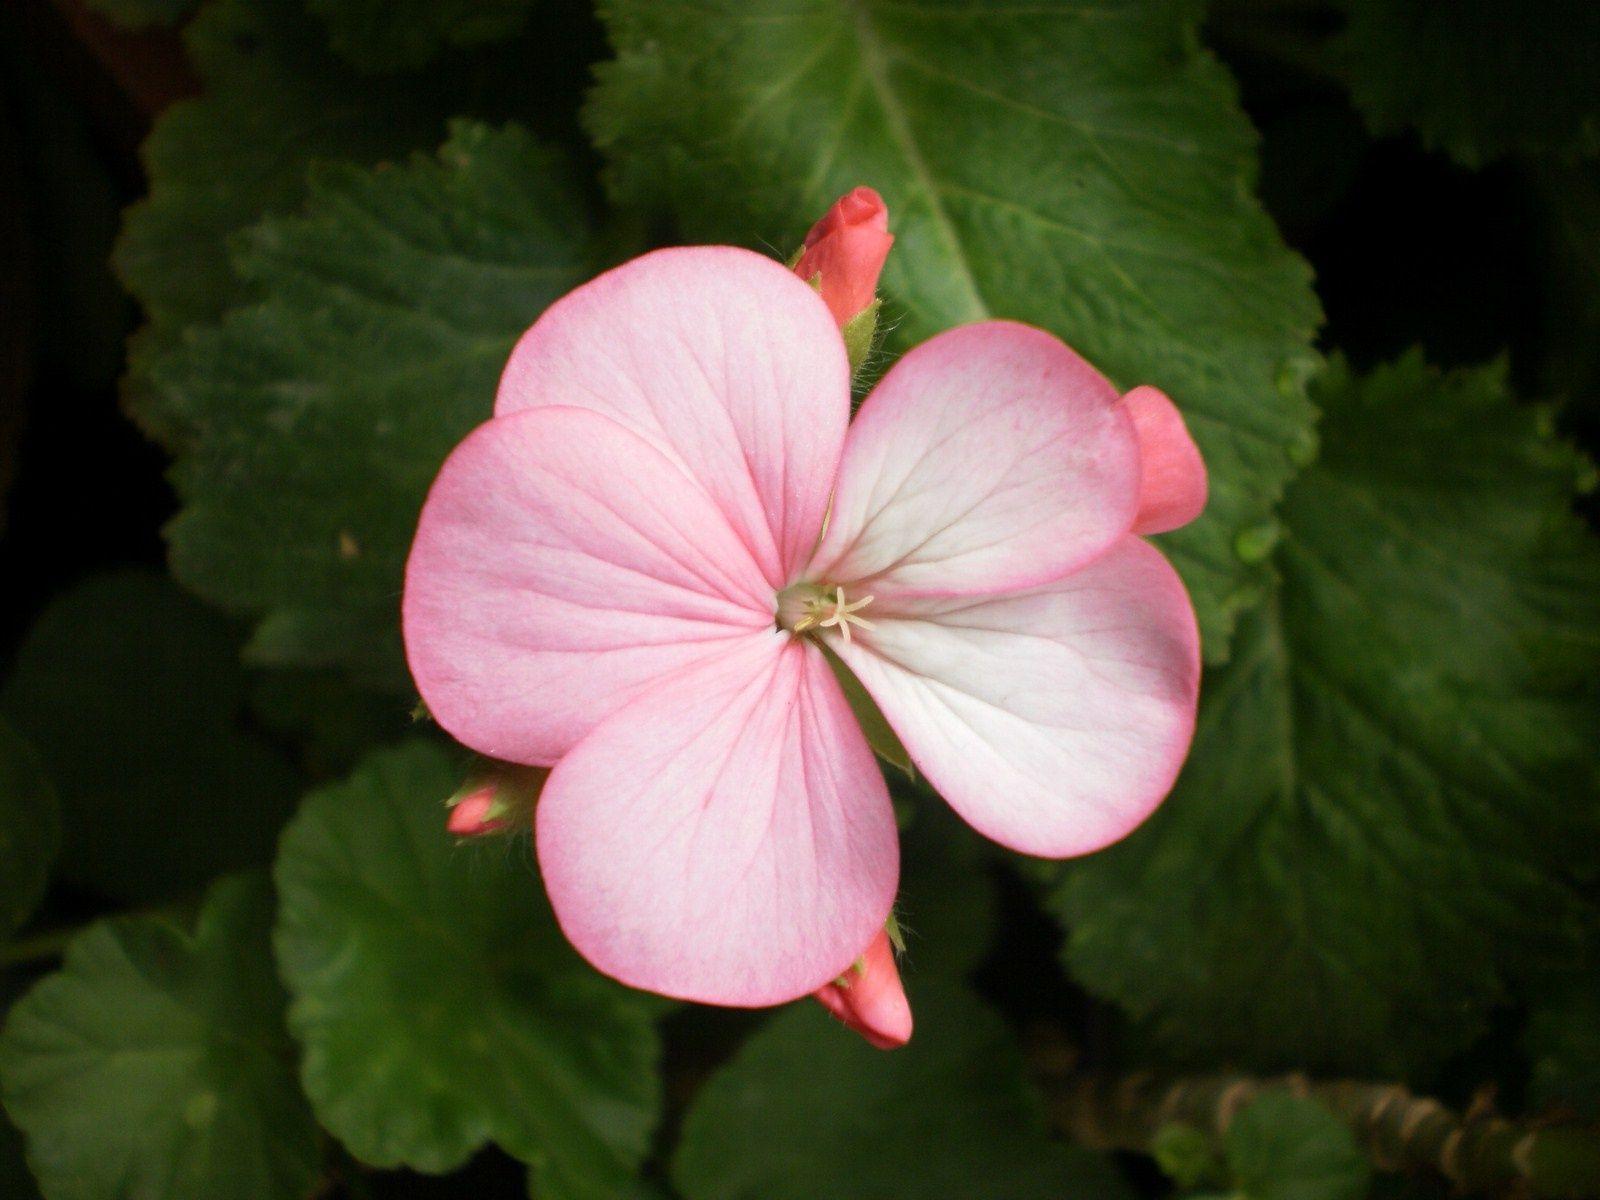 Little Light Pink Flower Wallpaper and Photo Download by PHOTOSof.ORG